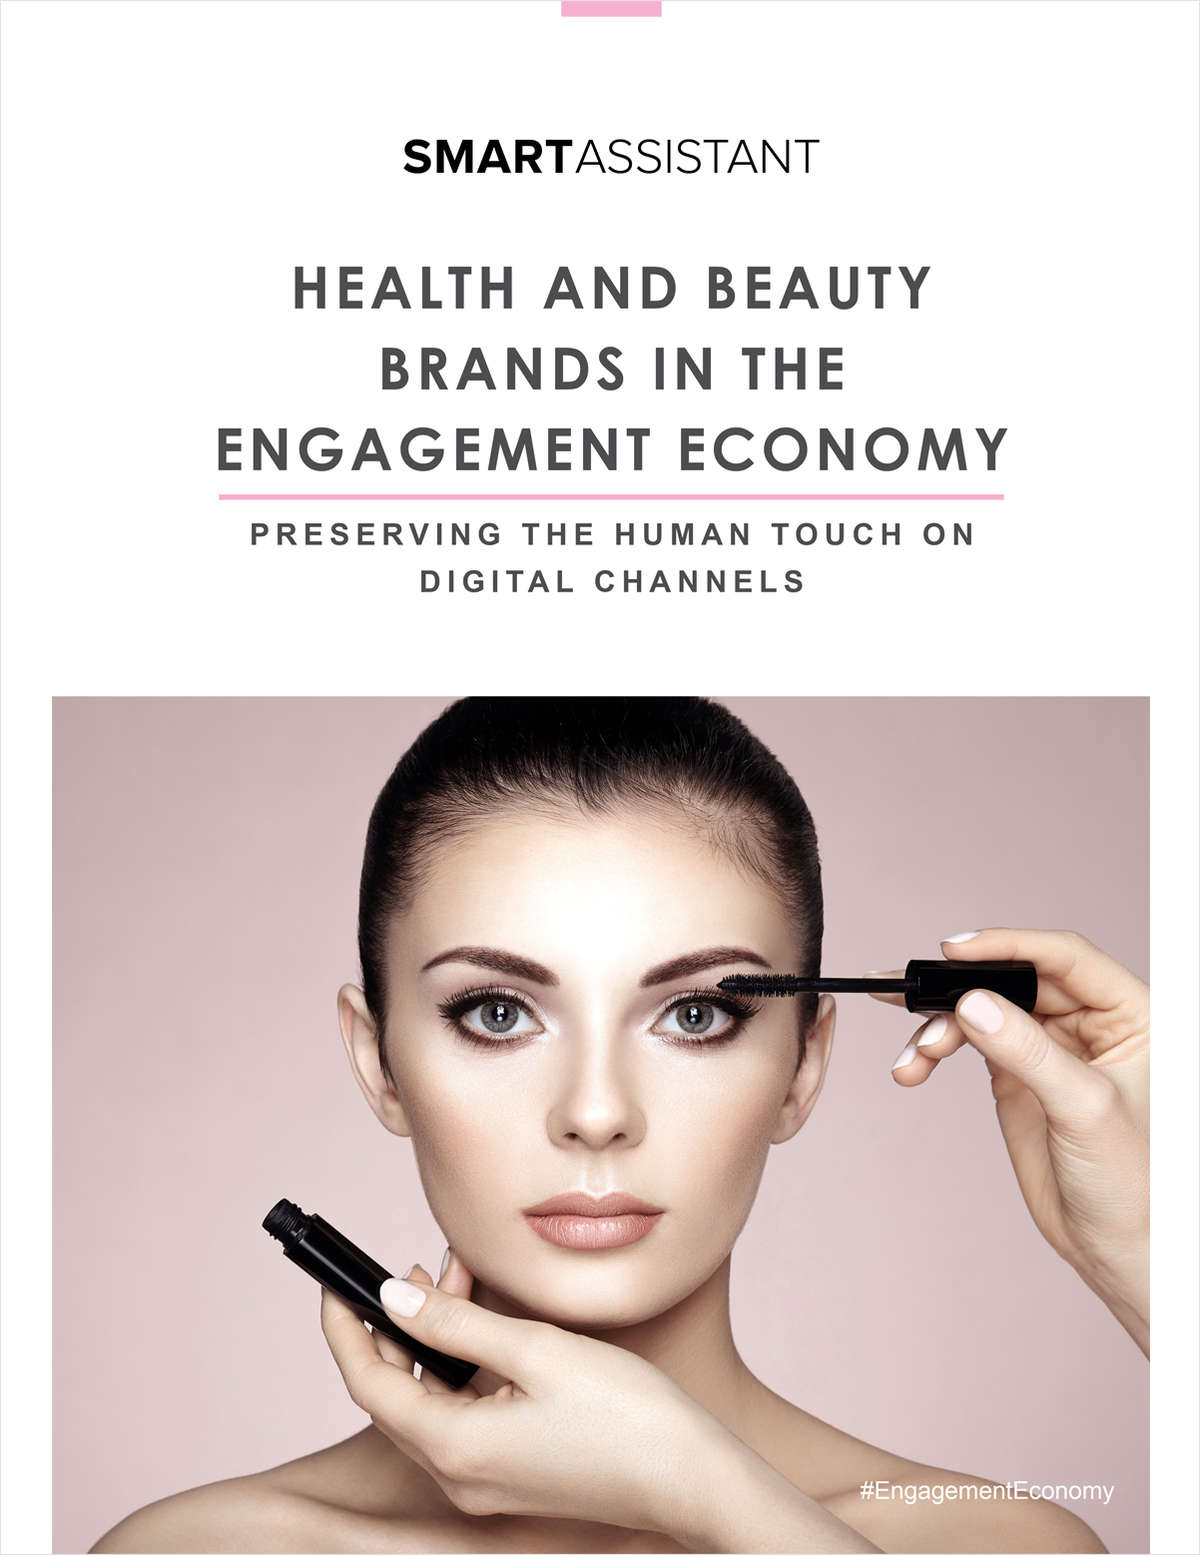 Health and Beauty Brands in the Engagement Economy -  How to Preserve the Human Touch on Digital Channels